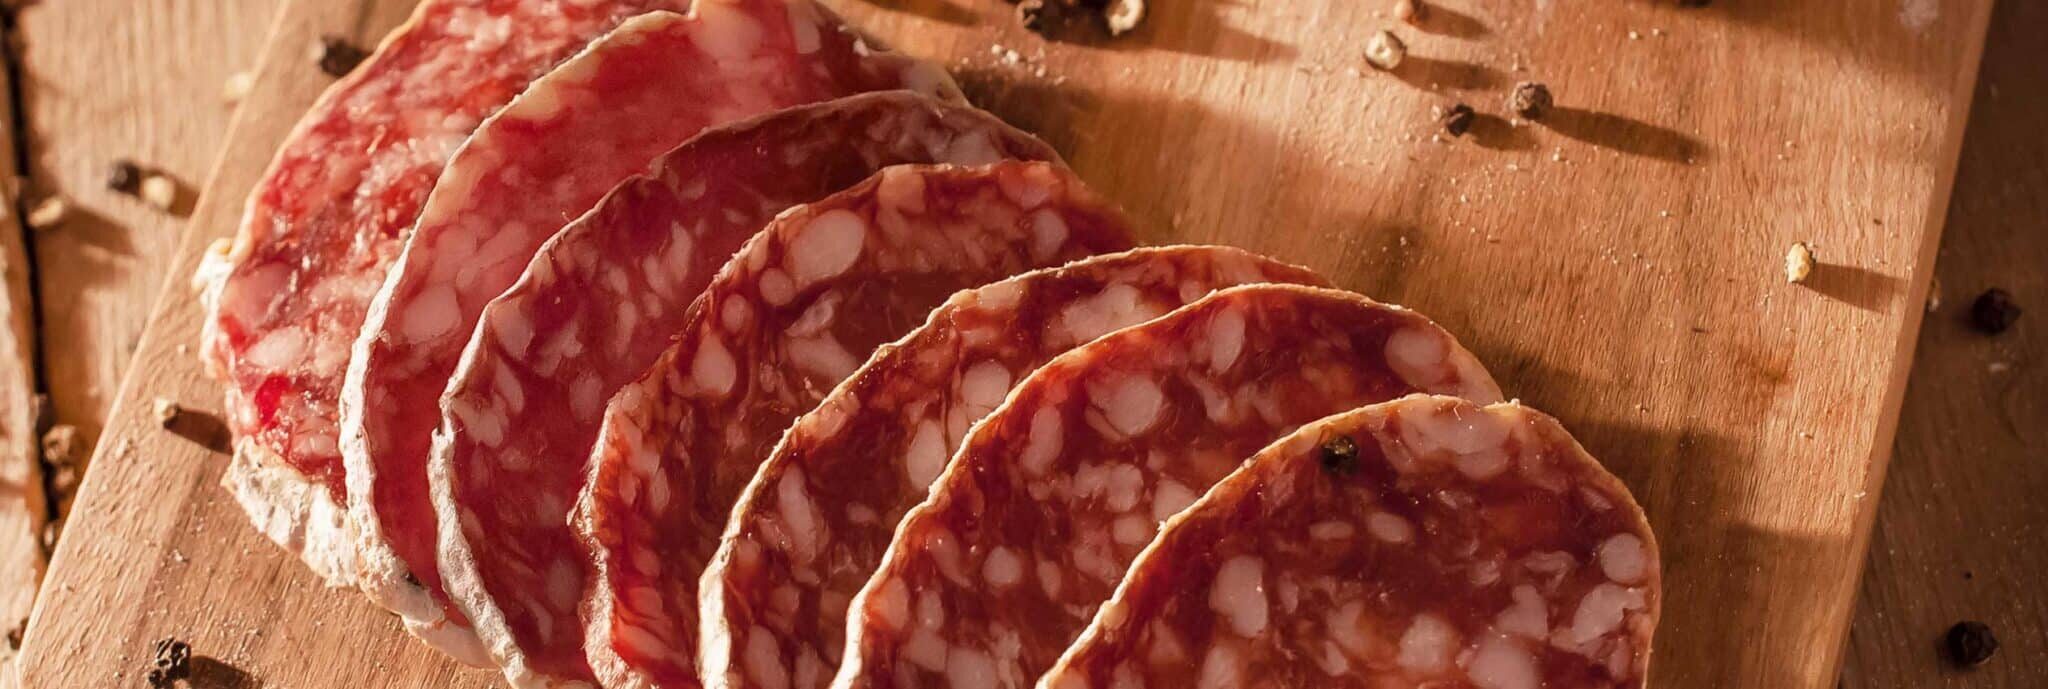 Salame Brianza DOP - Wine and Italy Travel